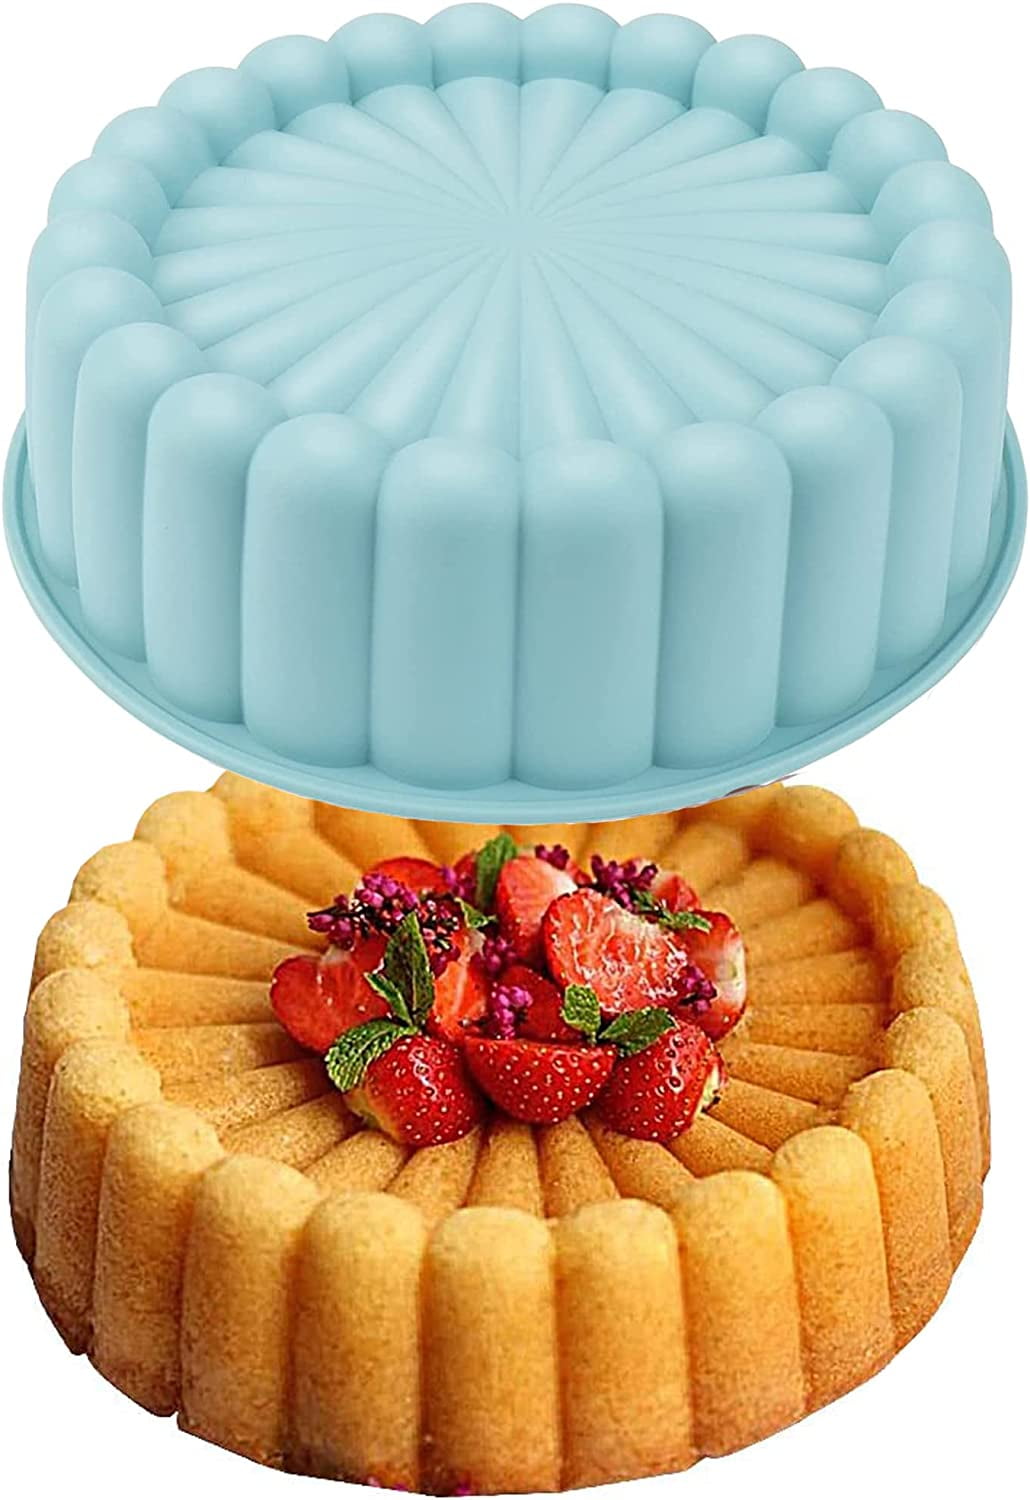 Goaste 9.5 Inch Charlotte Cake Pan, Reusable Mold Fluted Cake Pan, Nonstick  Aluminium Cake Mold with Flower Shape for Cheese Cake, Chocolate Cake